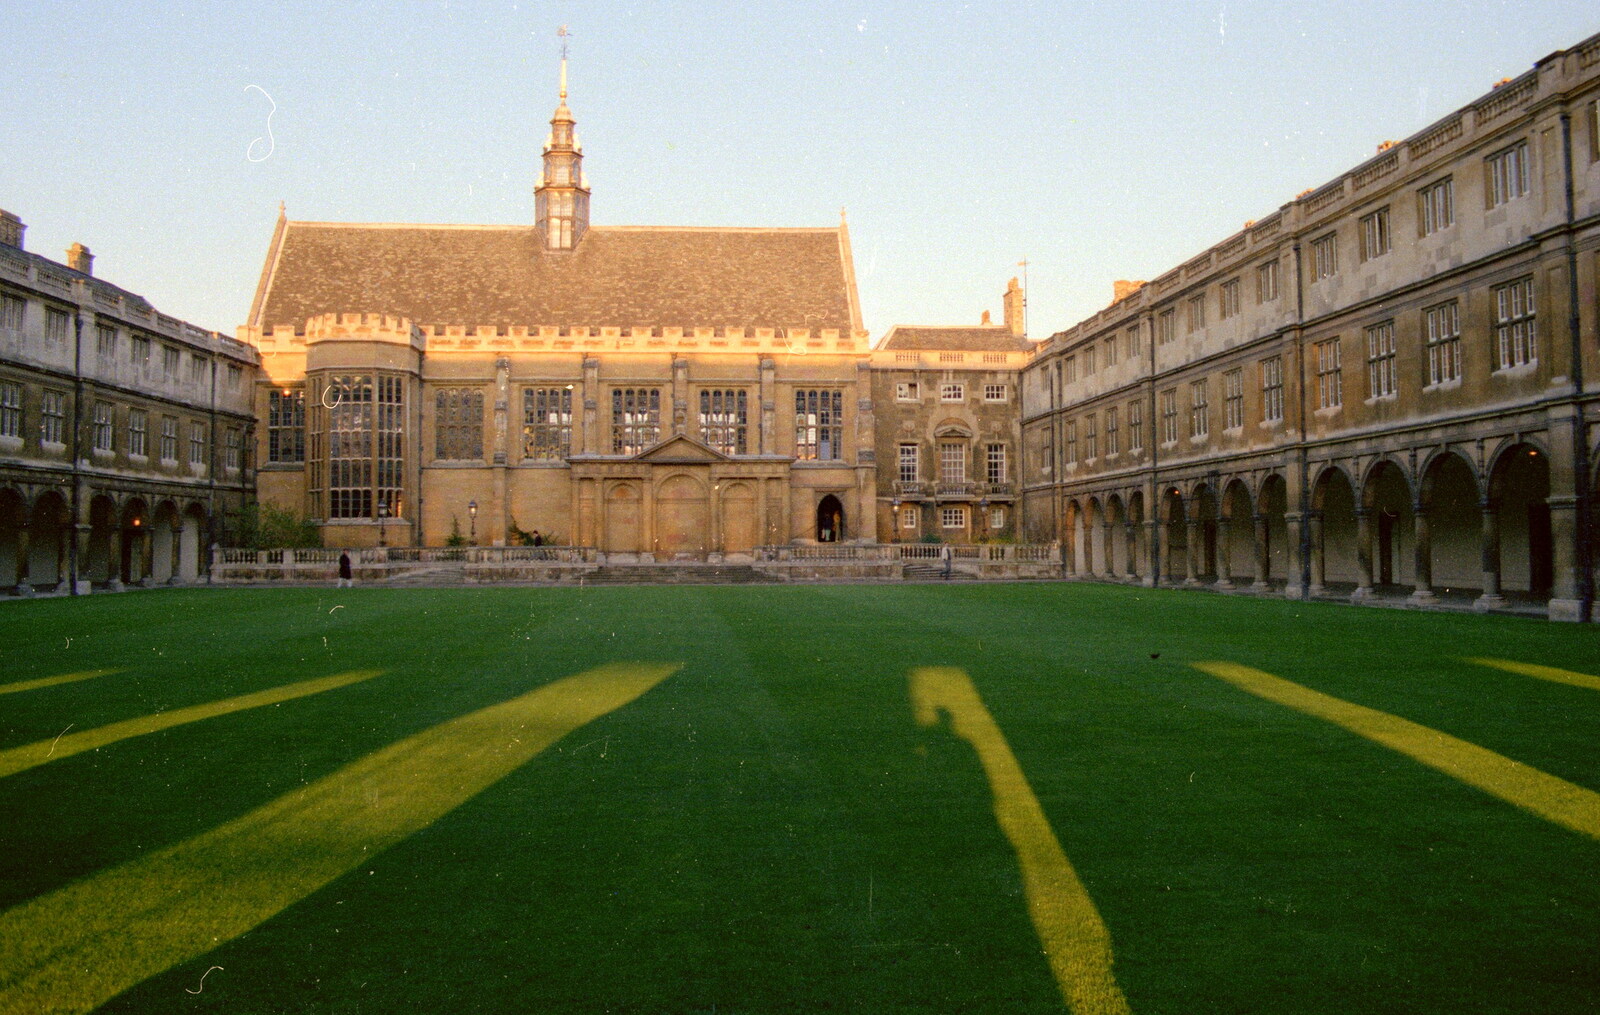 Possibly Neville's Court from A Trip to Trinity College, Cambridge - 23rd March 1986